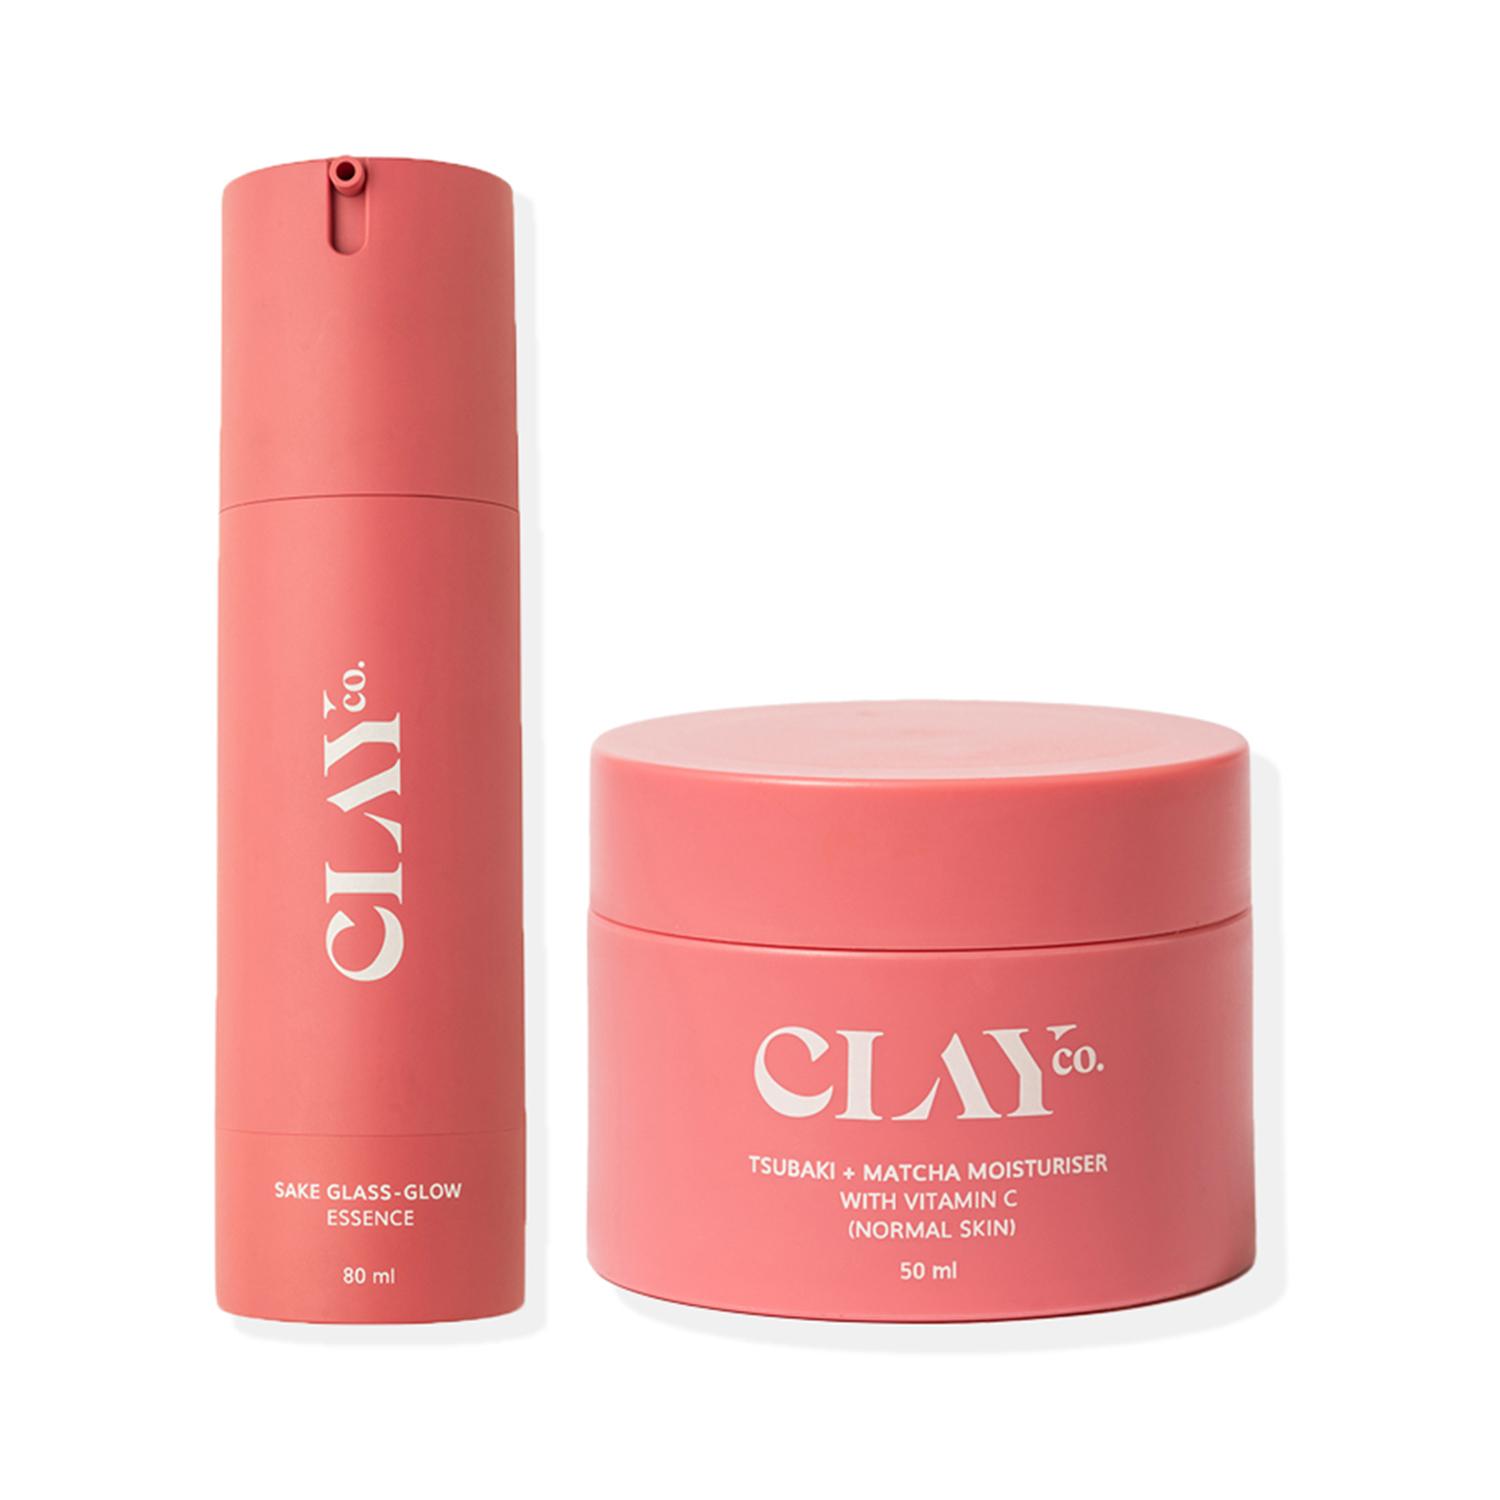 ClayCo | ClayCo Japanese Double Moisturisation Ritual Kit (For Normal Skin)